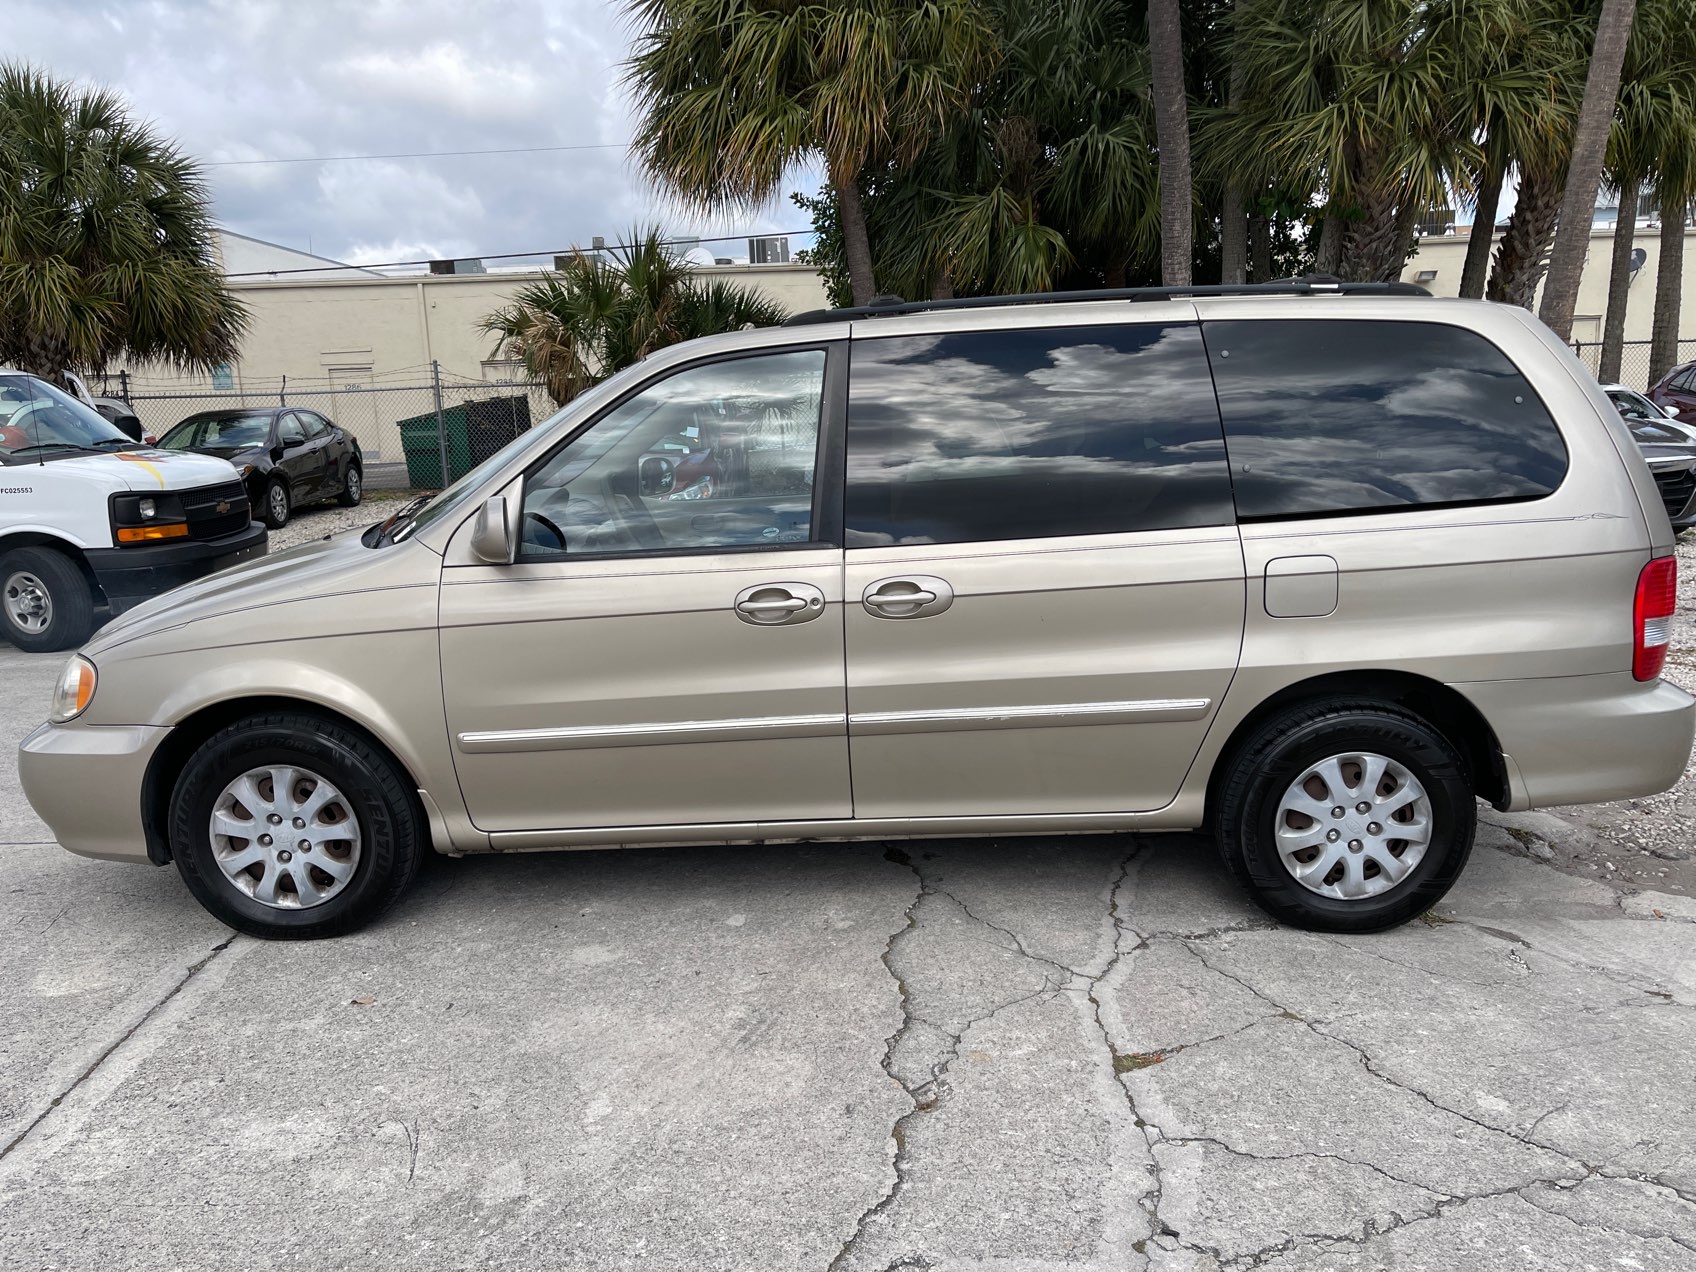 Used 2005 KIA SEDONA LX for sale in WEST PALM | 119993